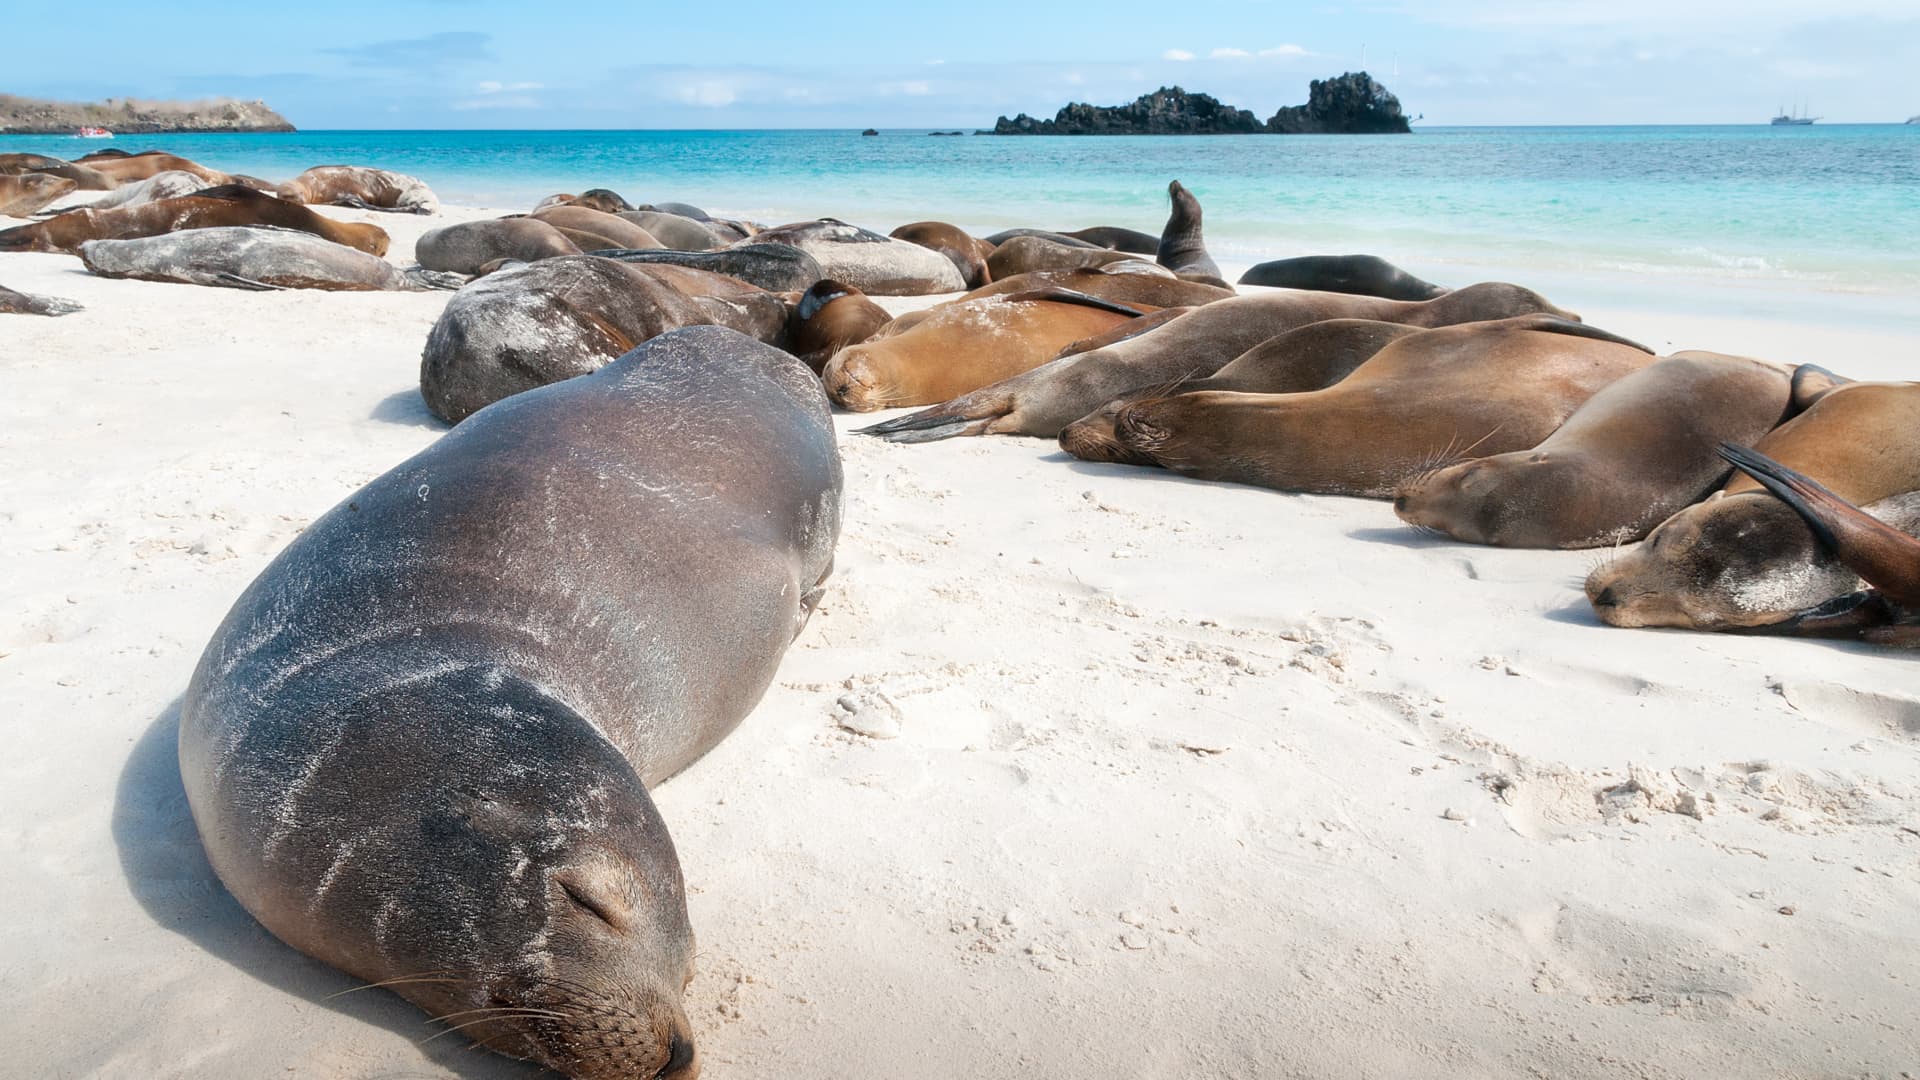 Expedition cruises are a popular way to explore the Galapagos Islands.